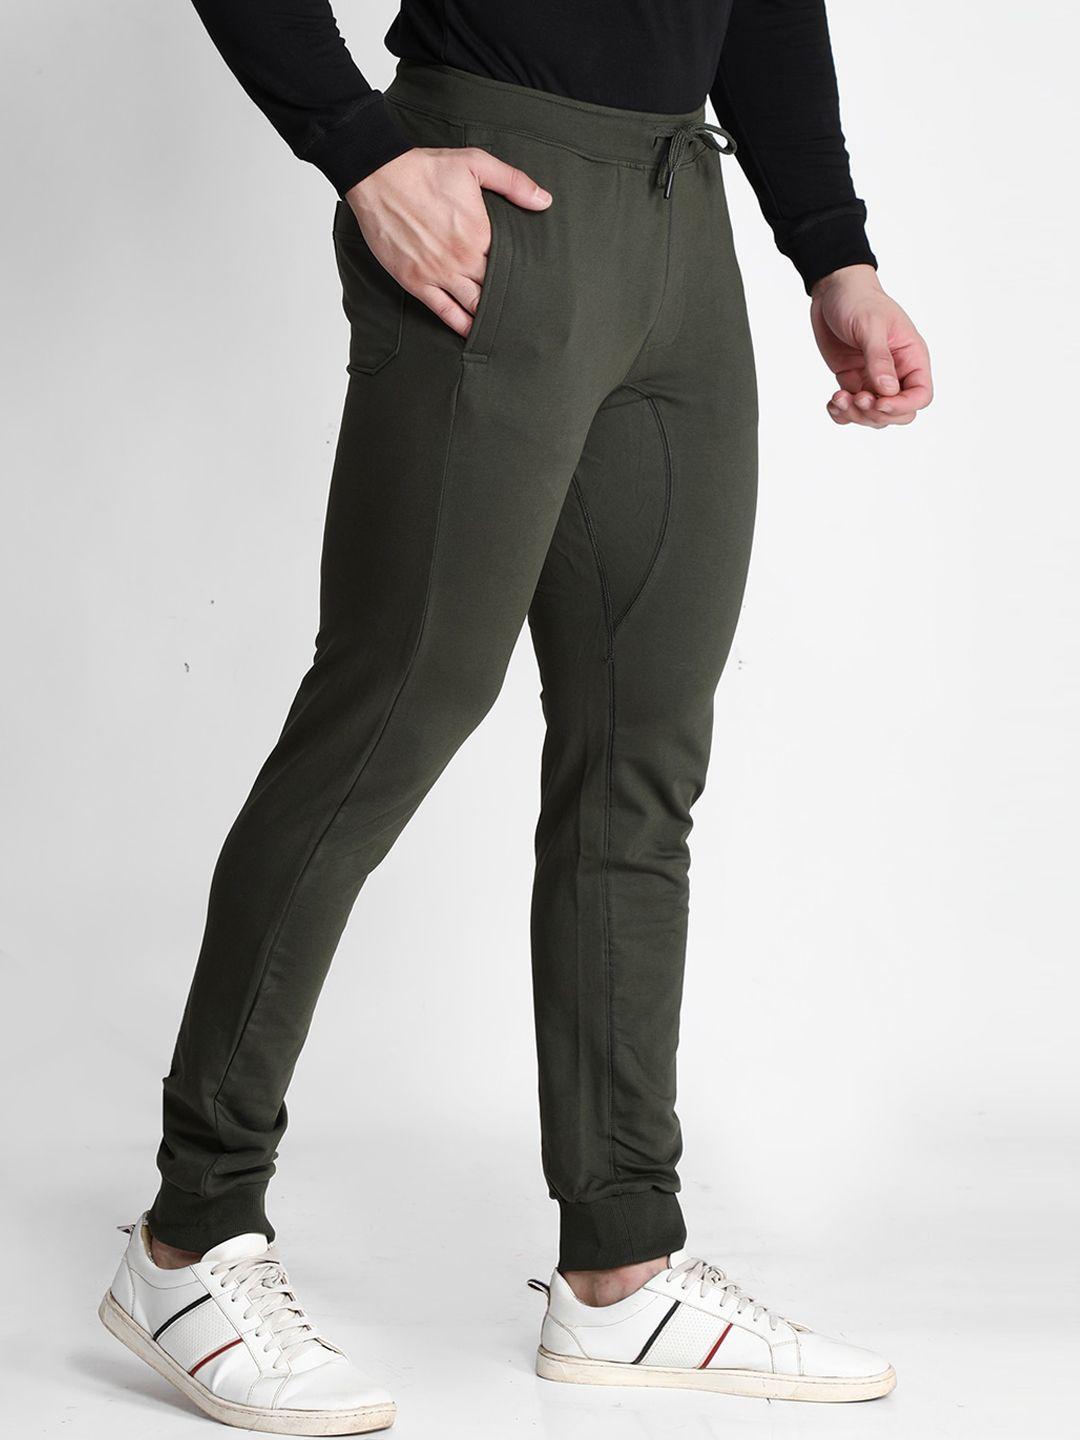 dream-of-glory-inc-men-olive-solid-cotton-relaxed-fit-joggers